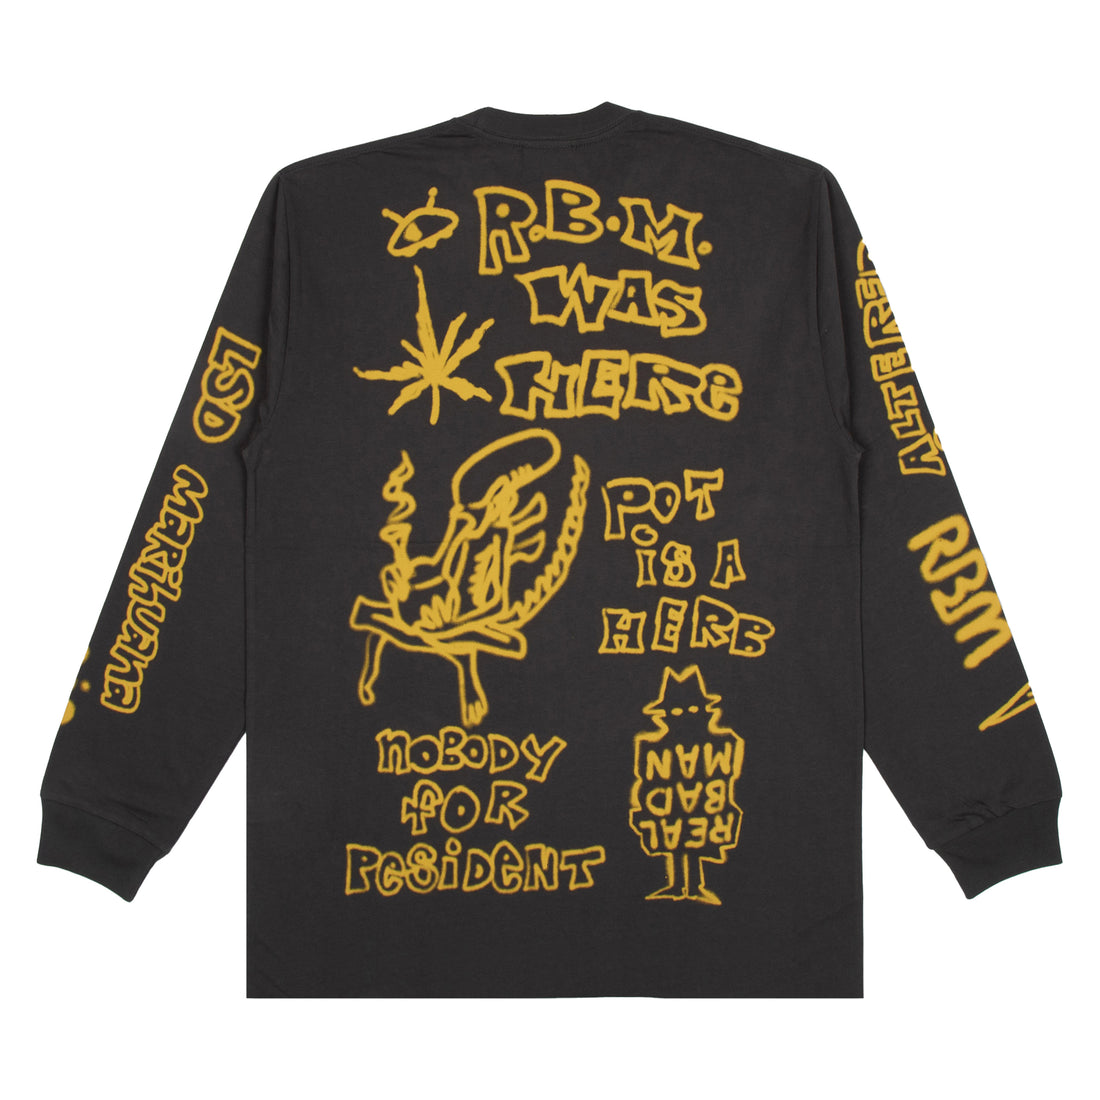 REAL BAD MAN - YOUTH PARTY L/S  - BLACK